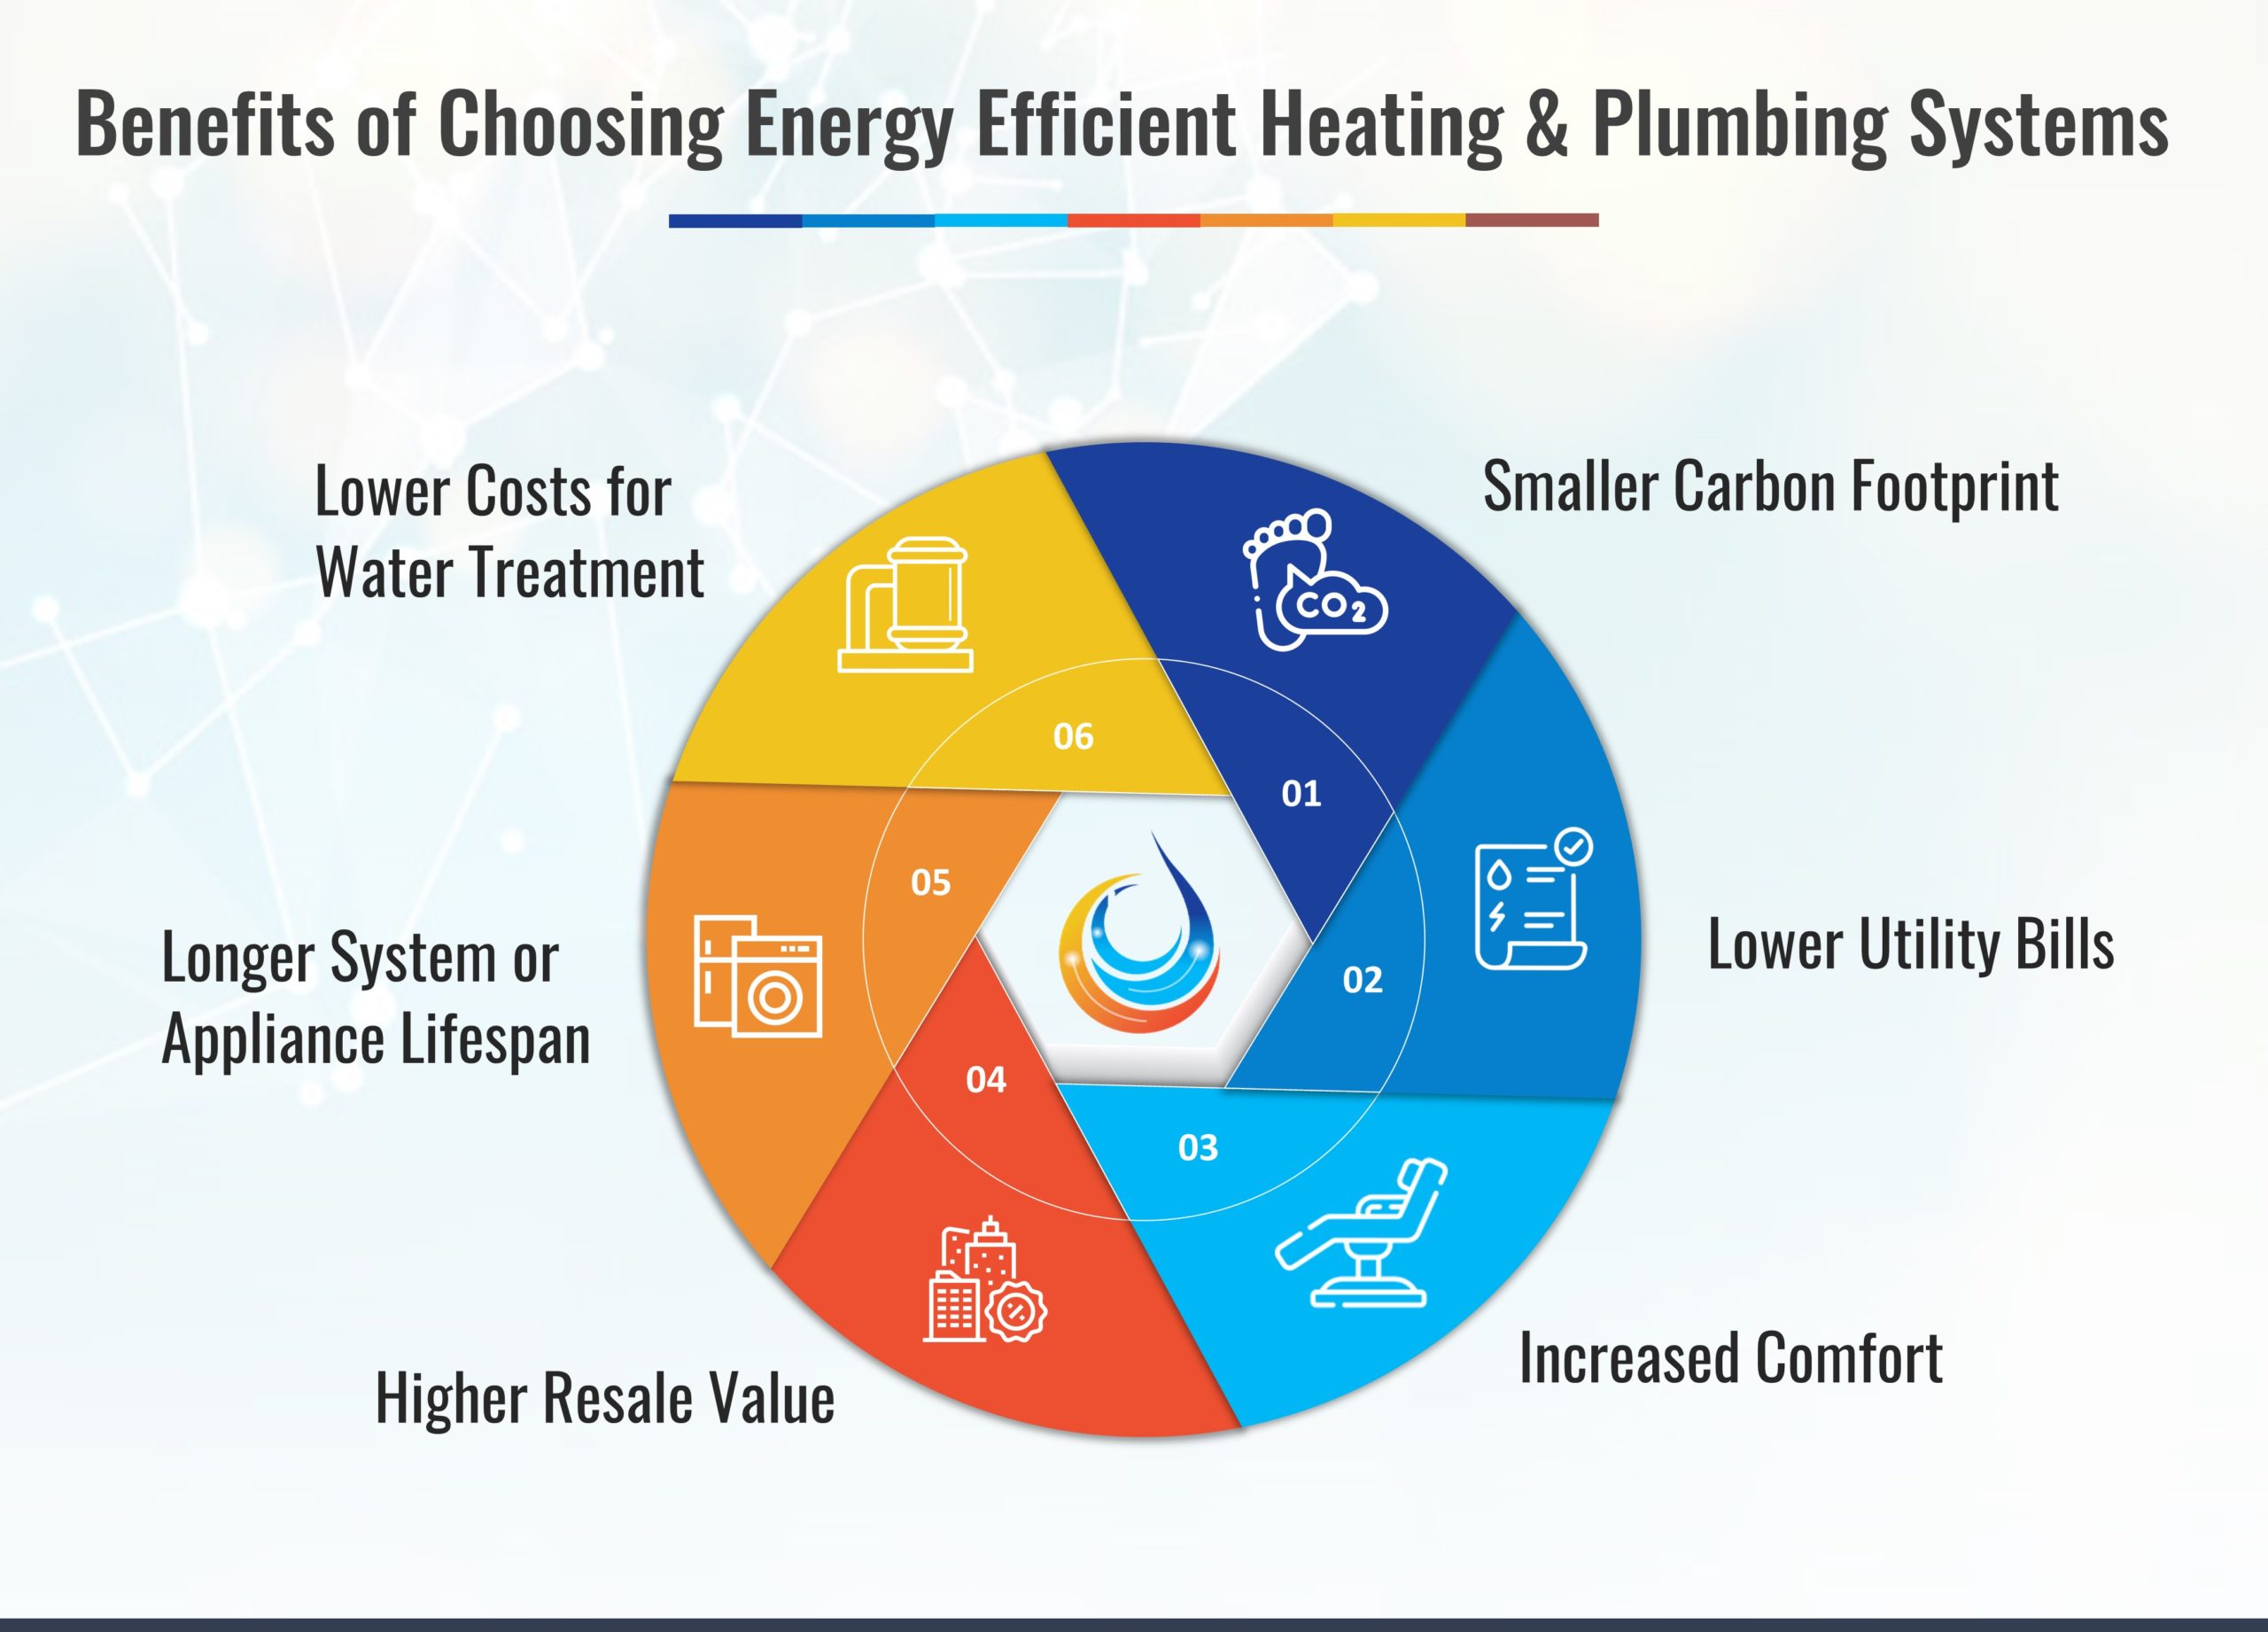 Benefits of Choosing Energy Efficient Heating and Plumbing Systems